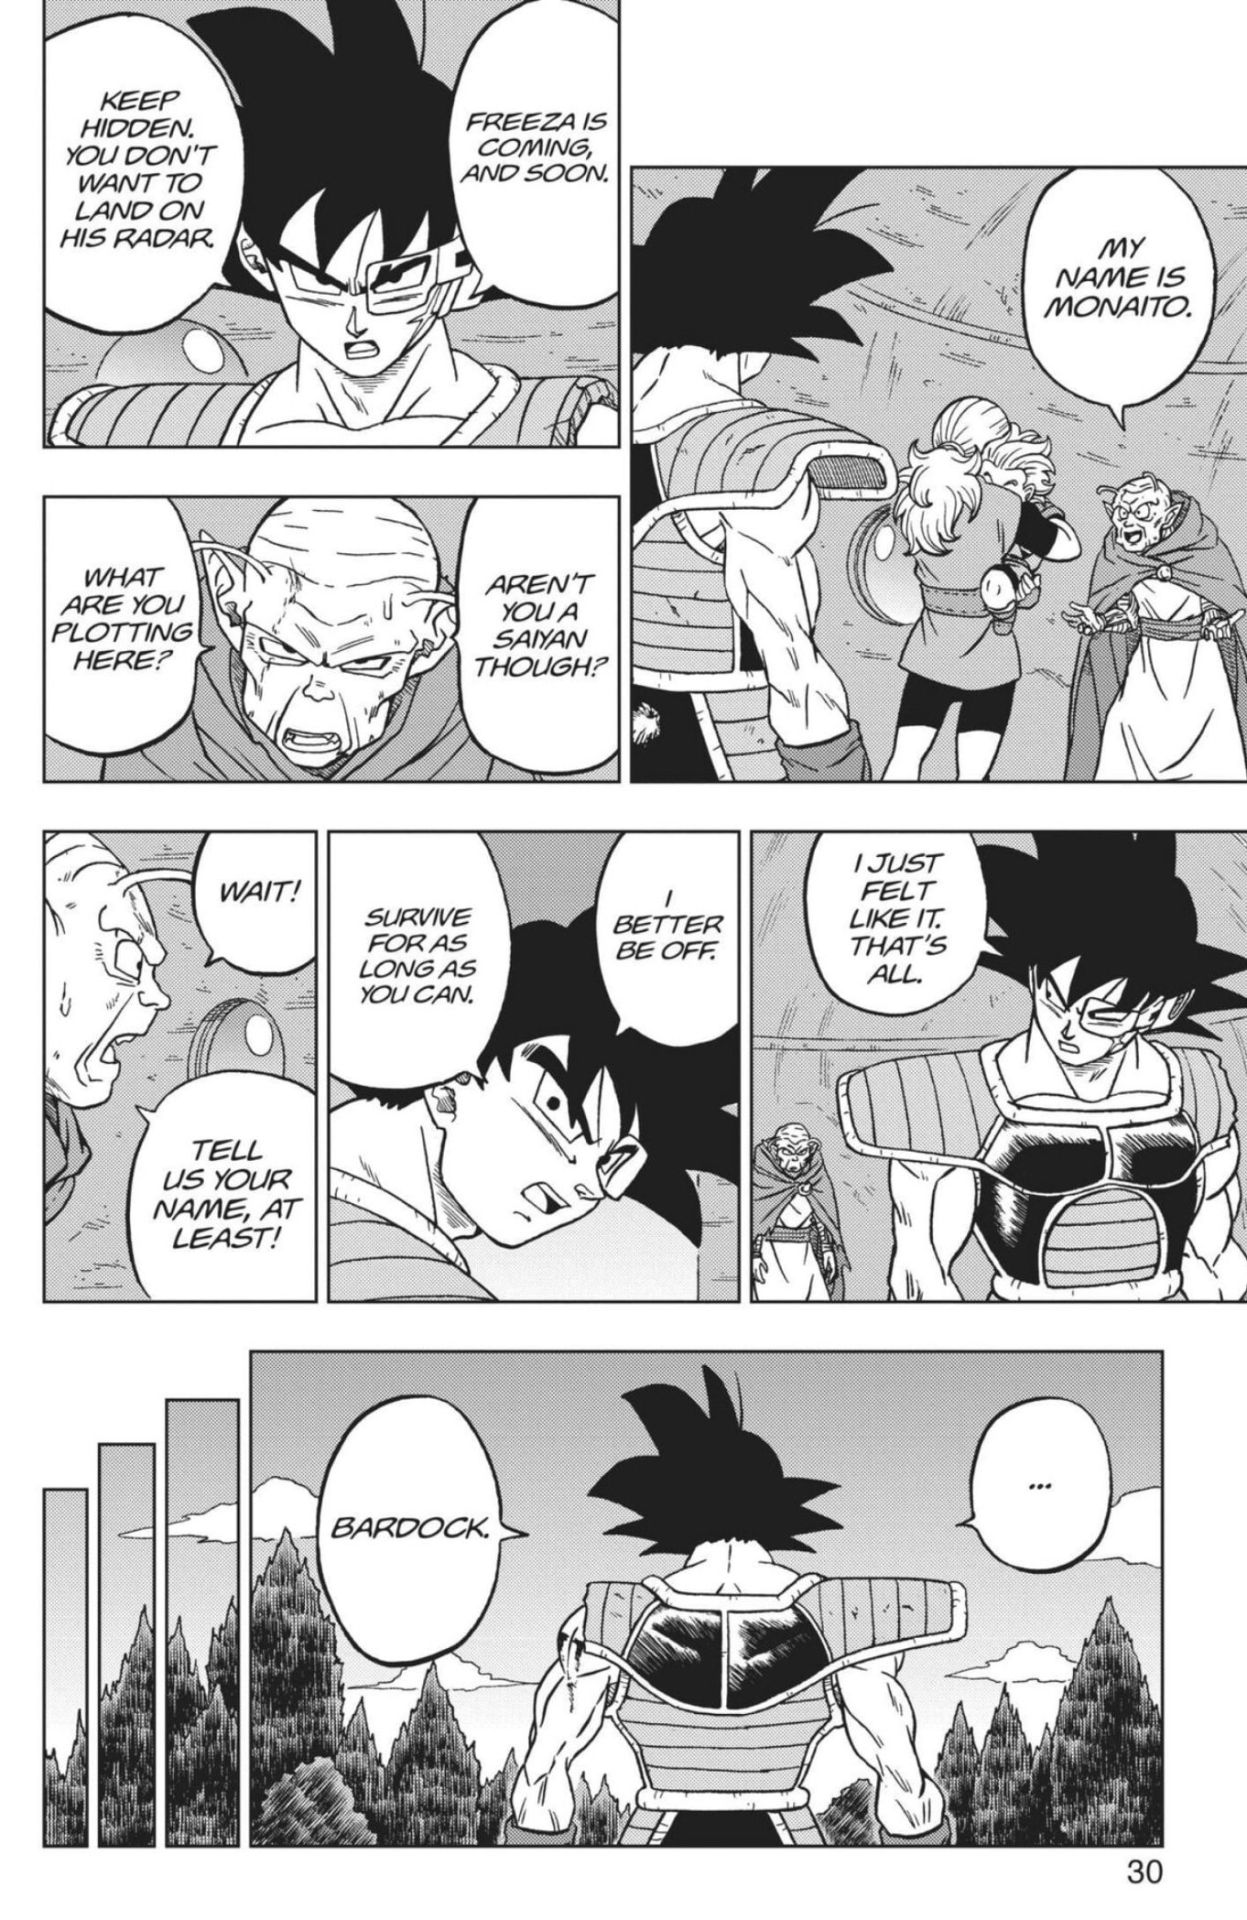 The Dragon Ball Super Manga is Almost Here